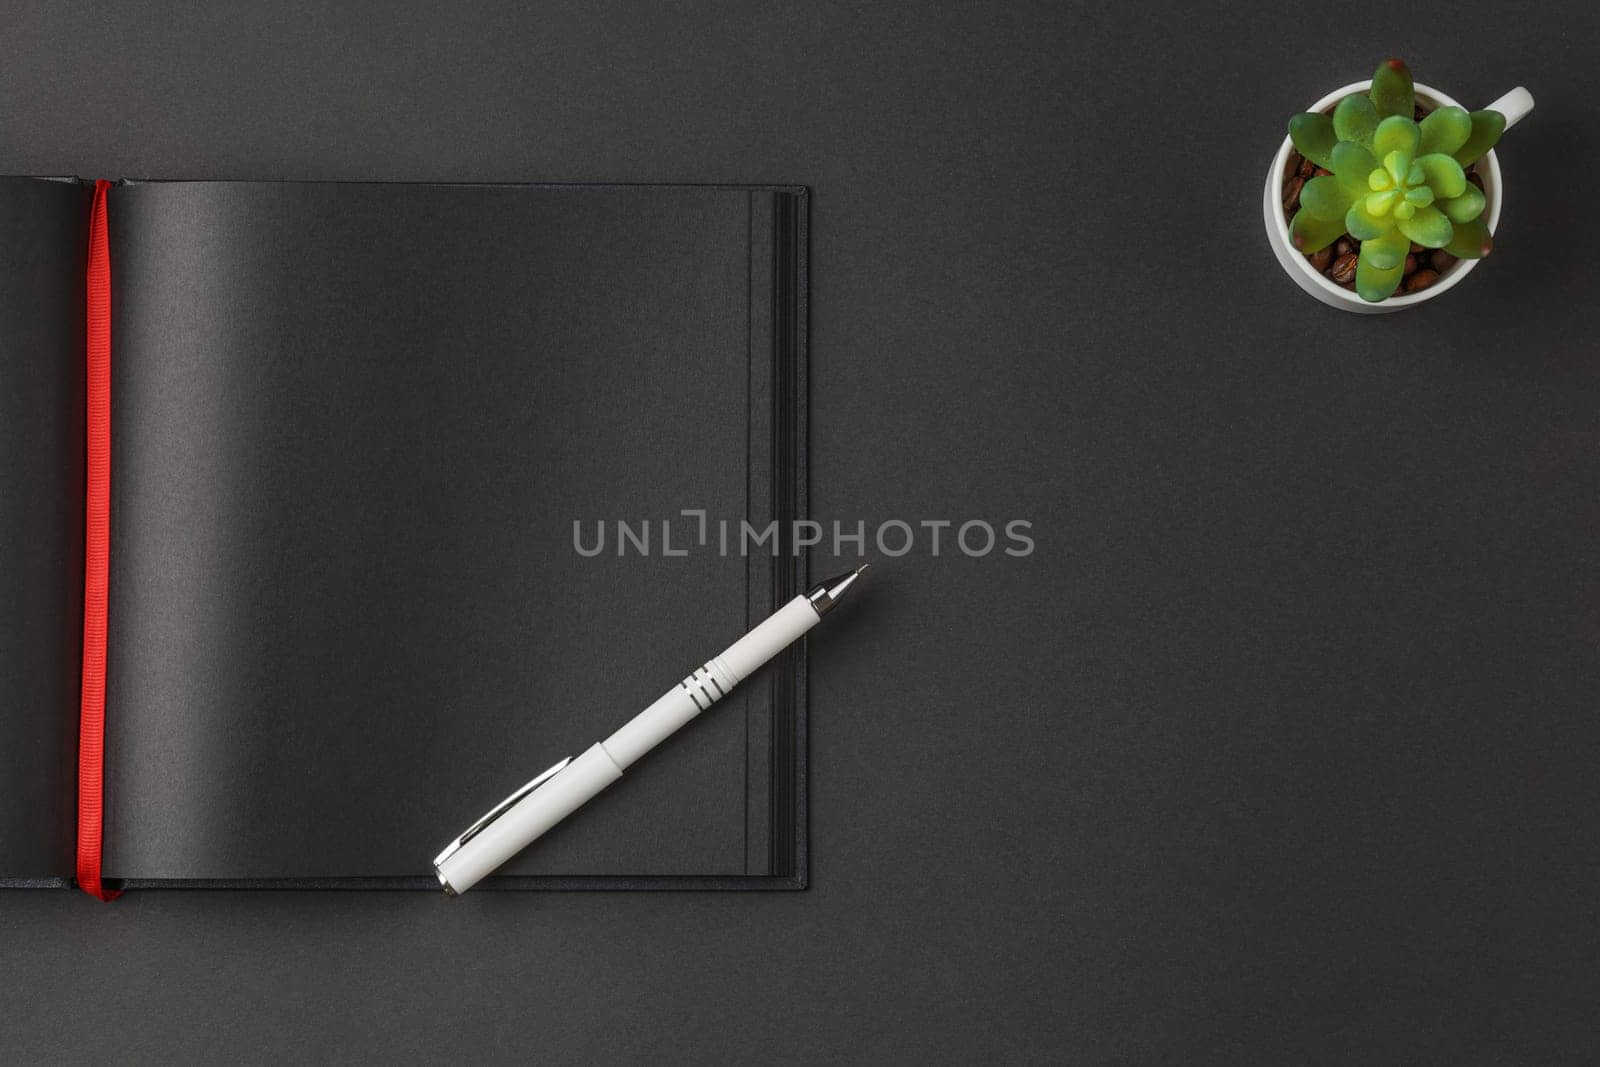 Black notebook with red ribbon bookmark and white pen on it and white cup for green ornamental plant on a dark background, flat lay.